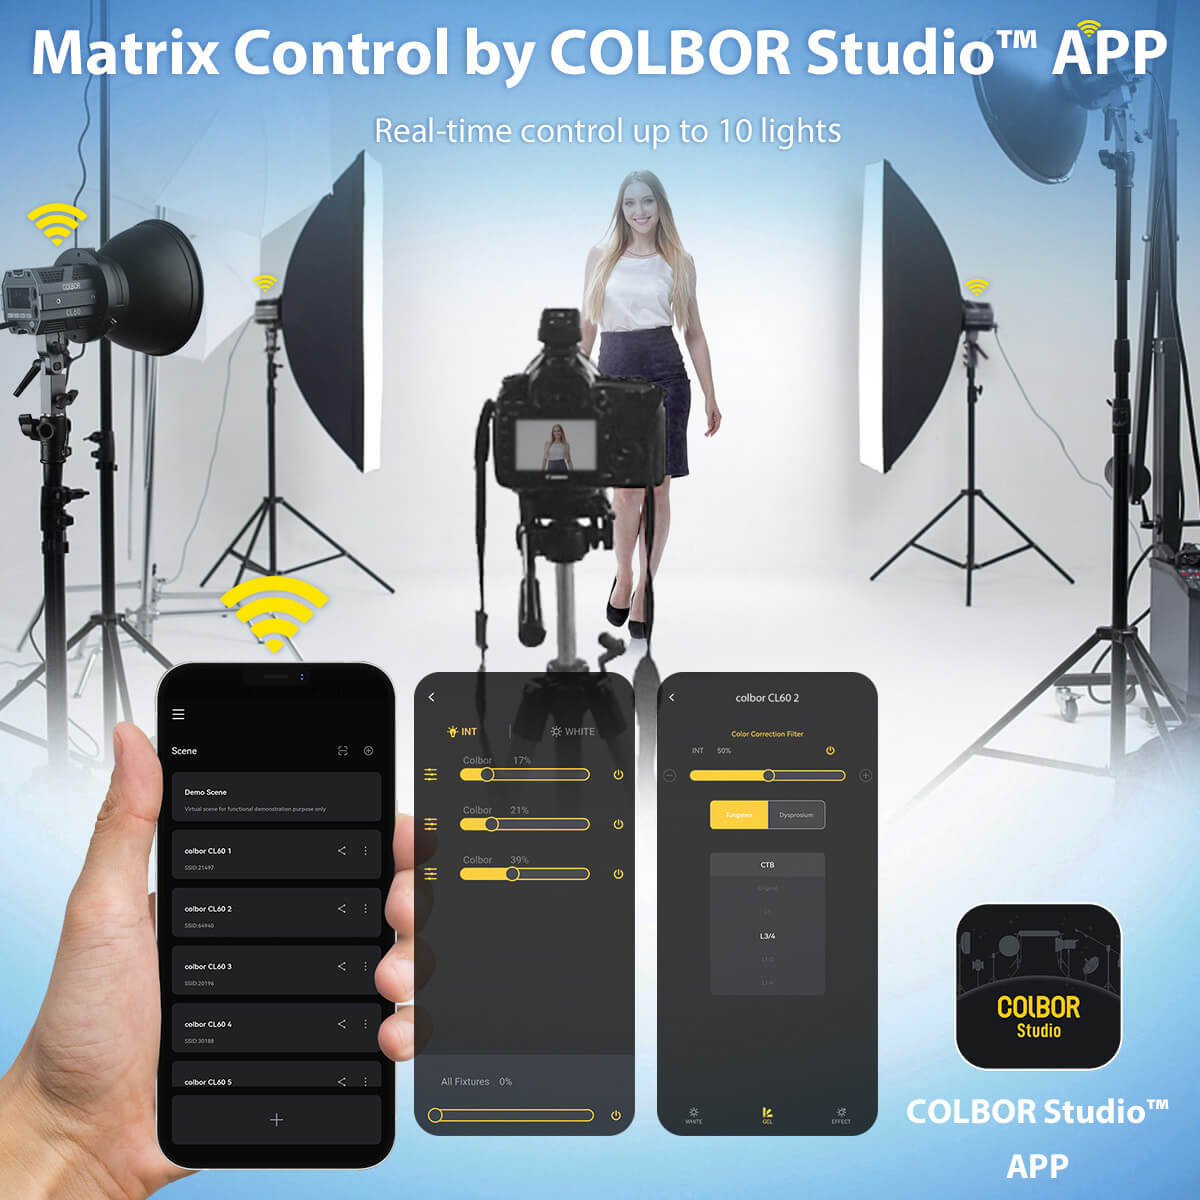 Users can enhance the control over COLBOR CL60M using the free COLBOR studio light app on their smartphones